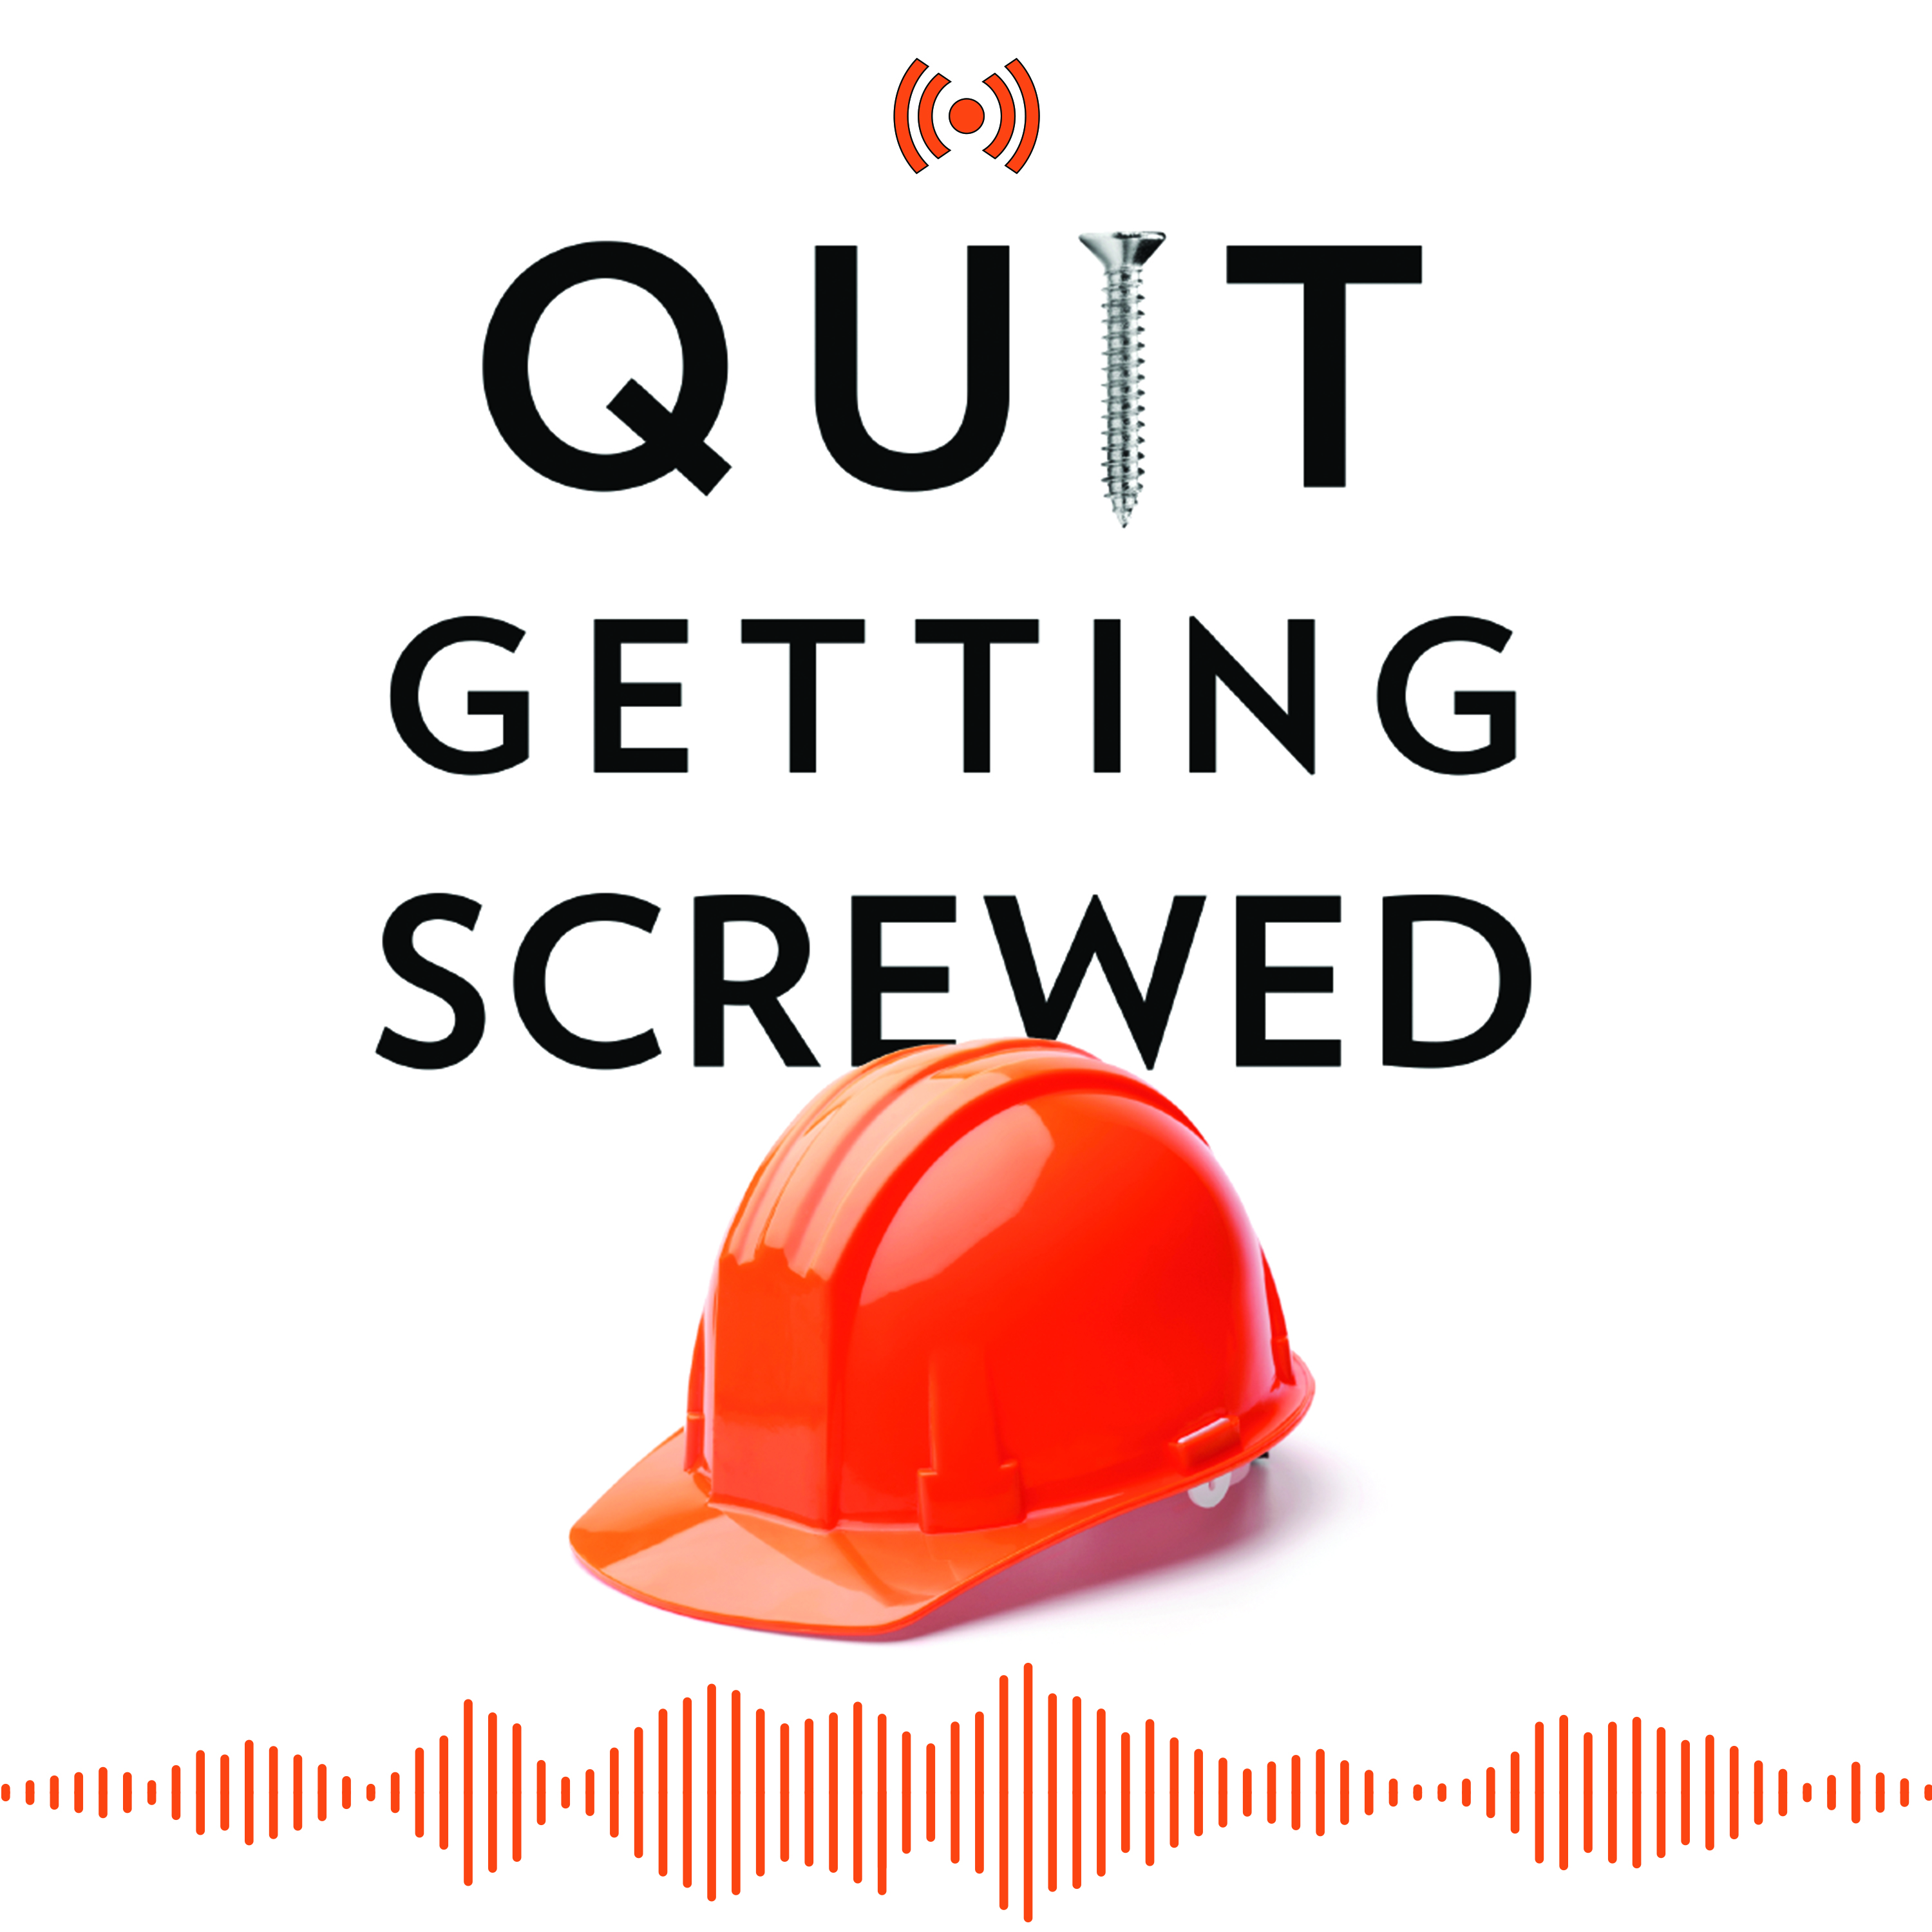 Episode 9: Subcontractor or Employee? (With Kelly Stamy)